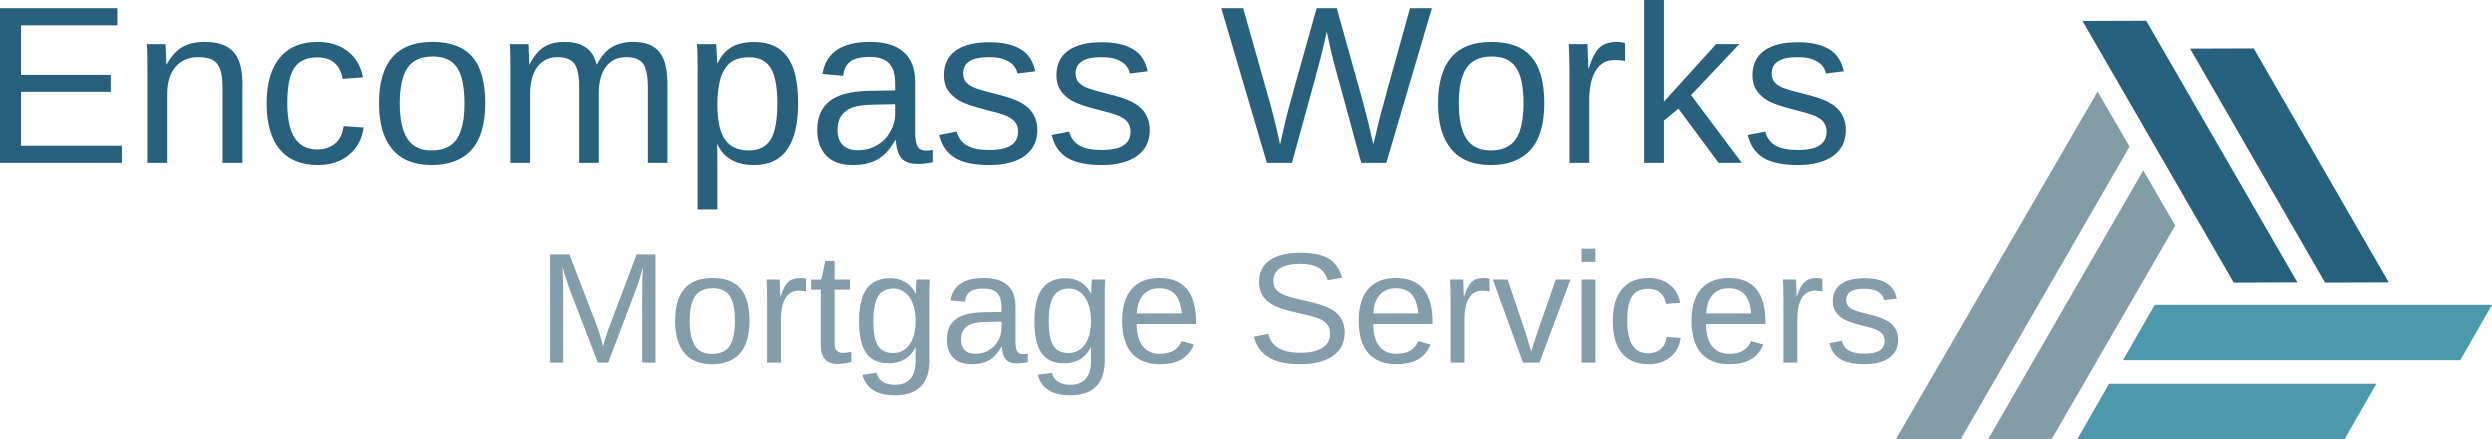 Encompass Works Mortgage Servicers